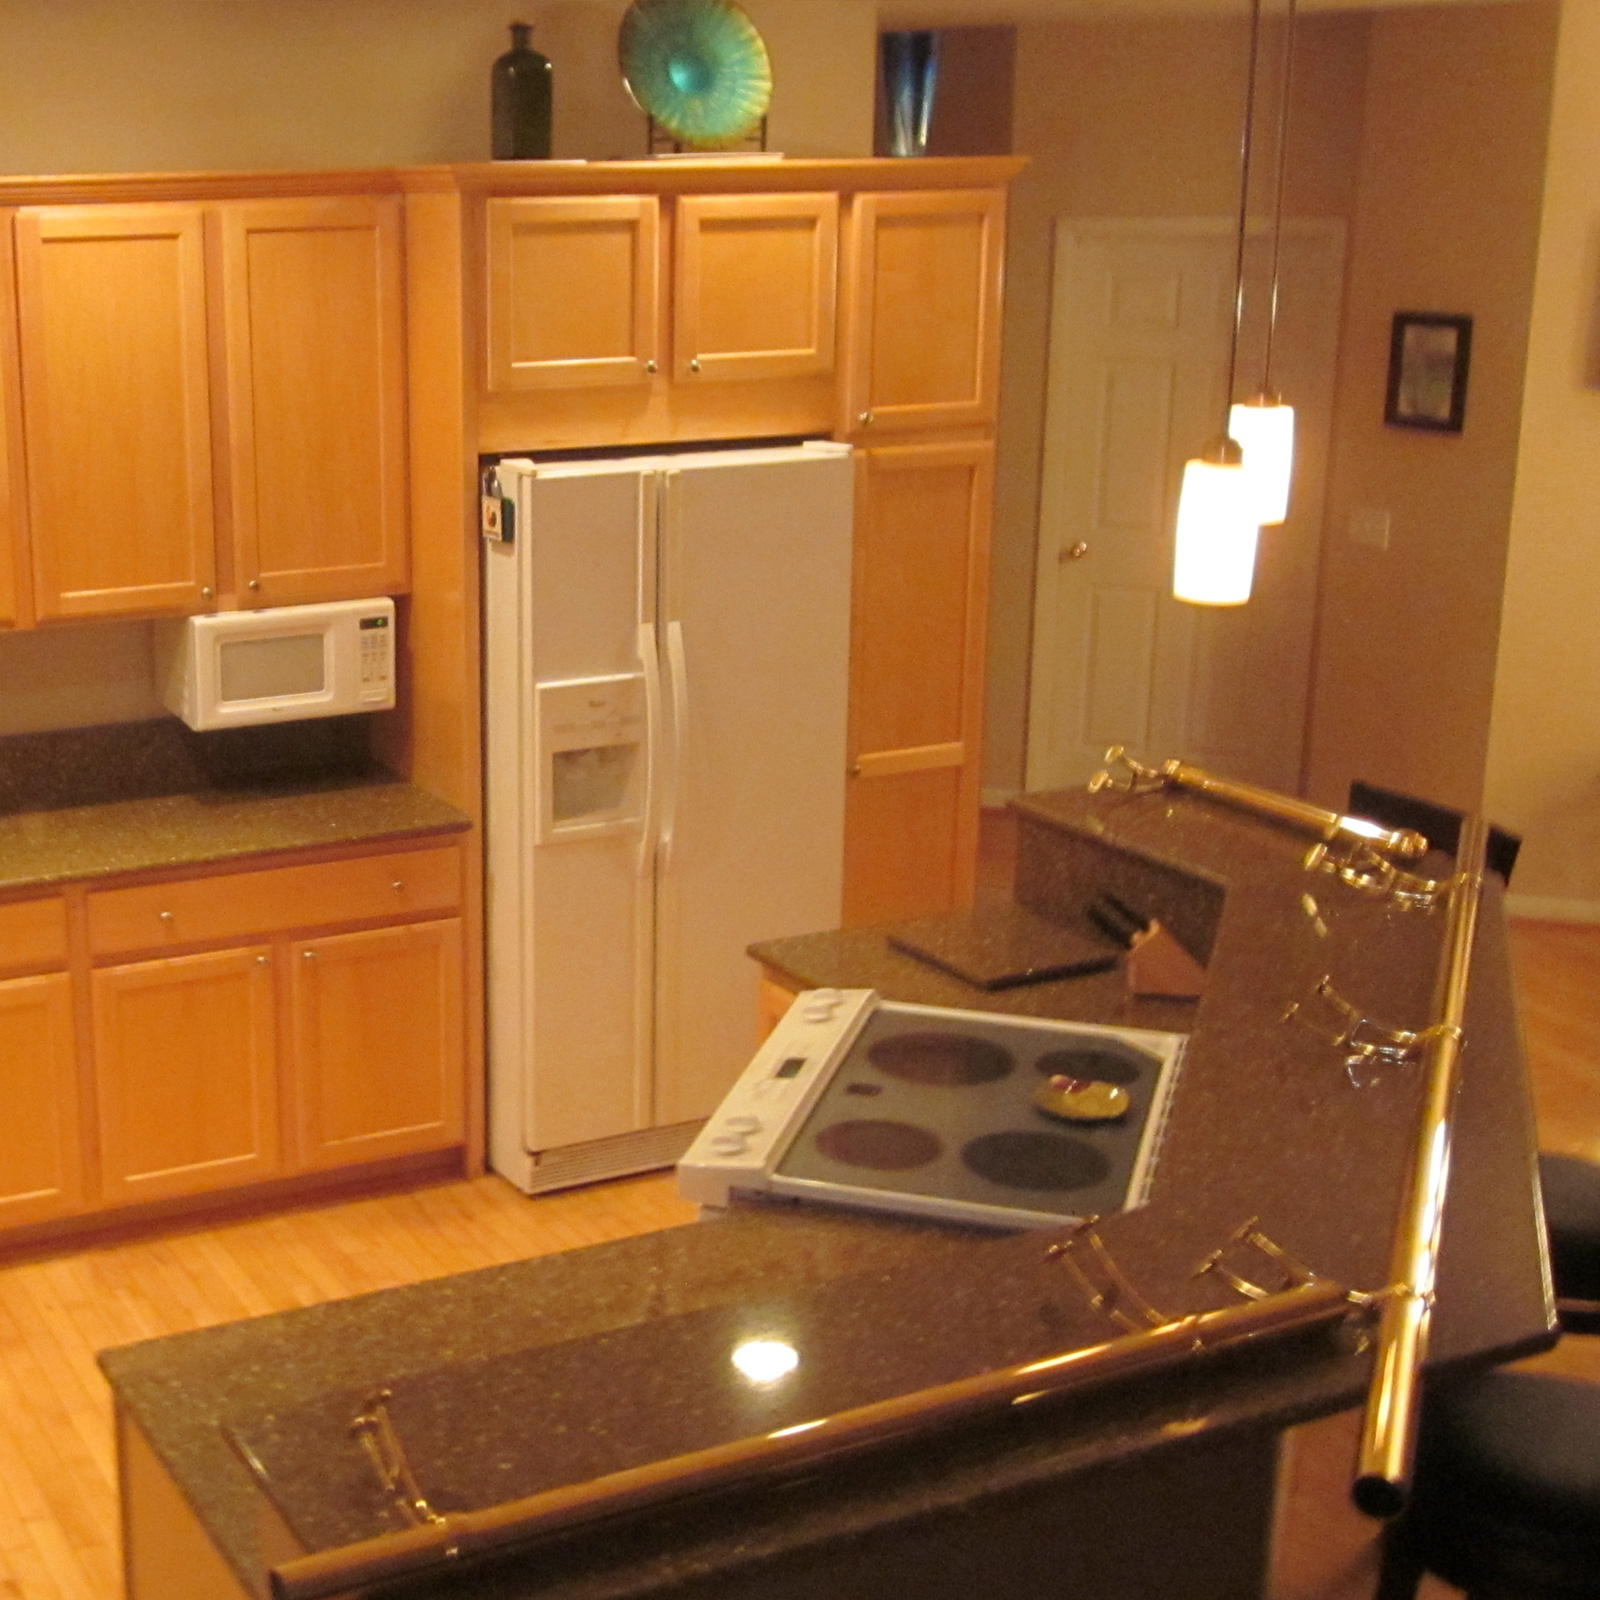 Entry 4 - This dated kitchen needs some love